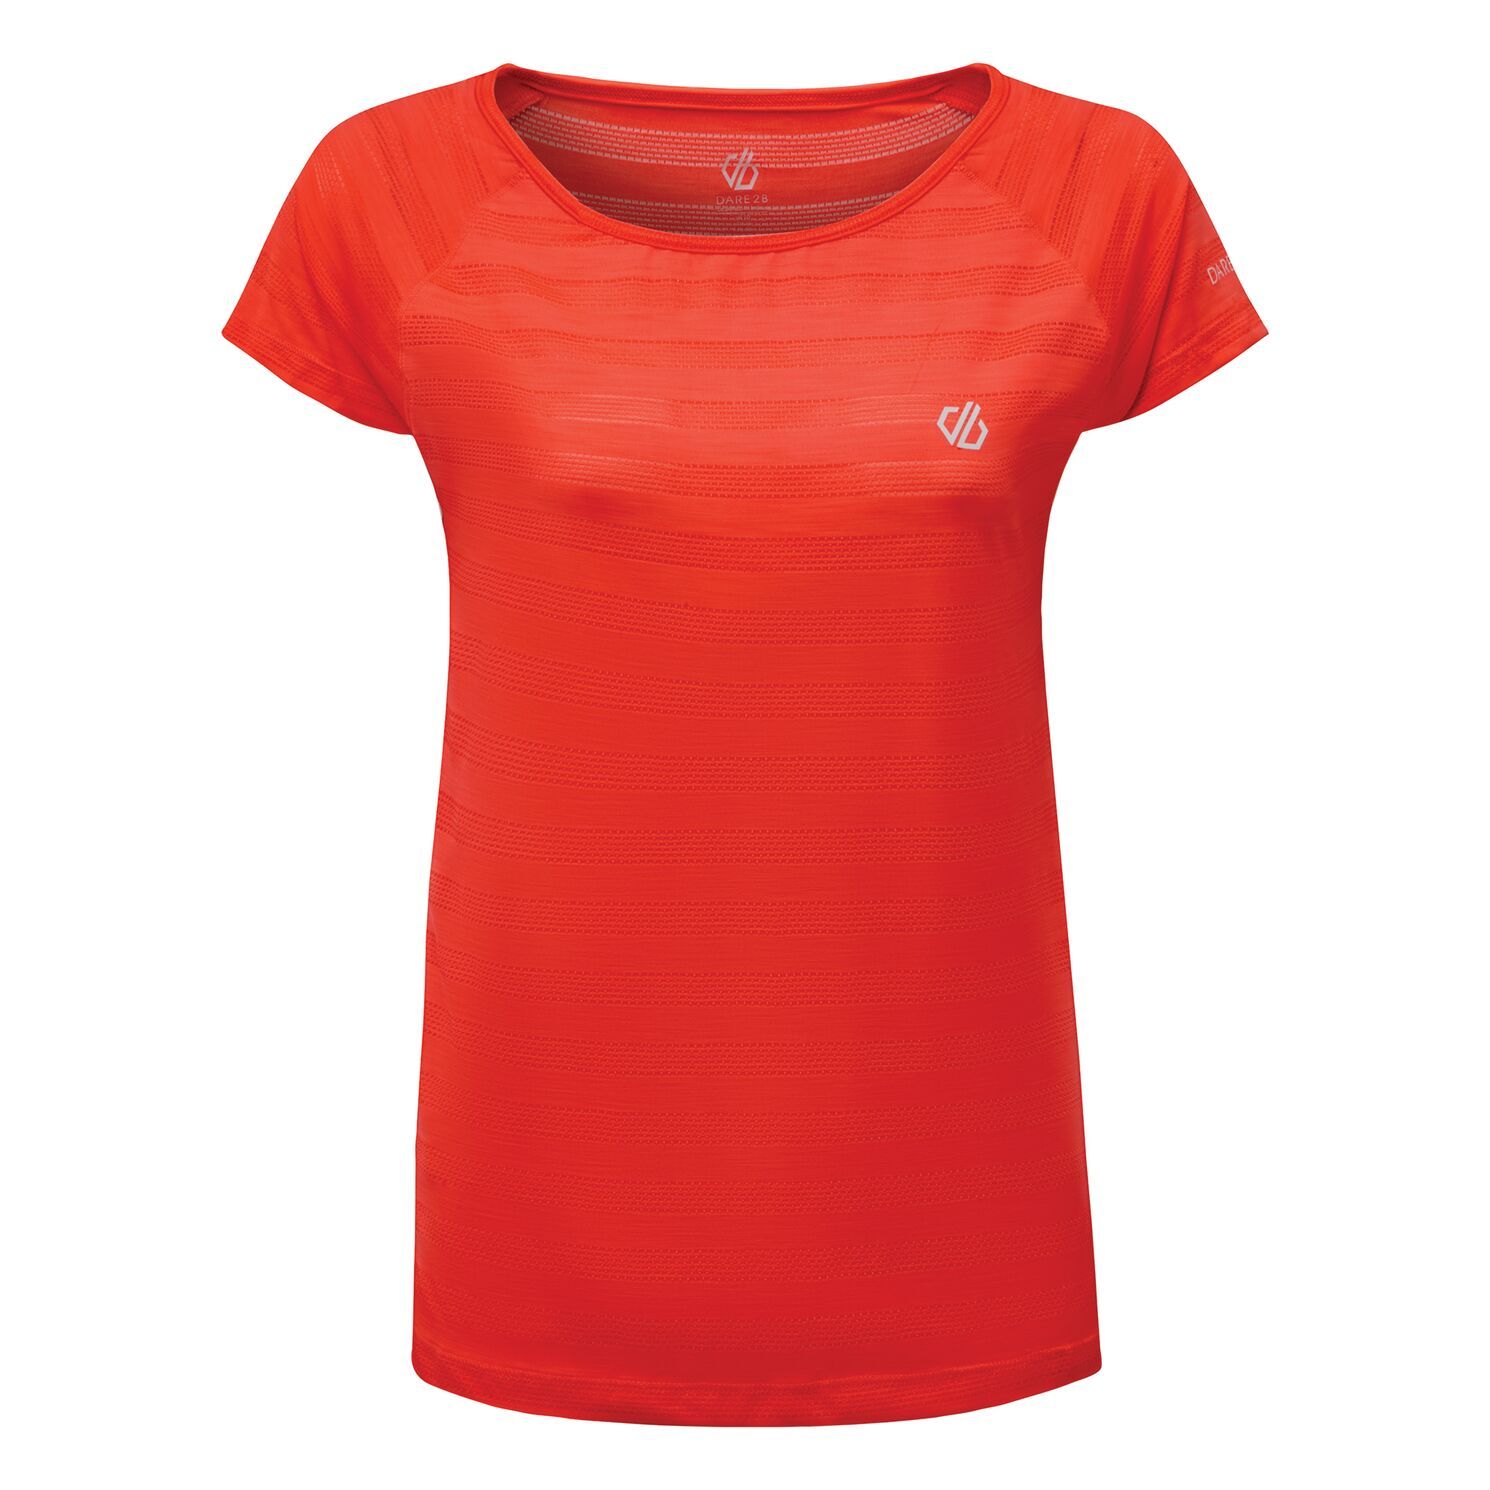 Material: 100% Polyester (Q-Wic lightweight polyester fabric). Slim fit, soft and stretchy short sleeved work out shirt with breathable mesh detailing and scooped neckline. Built in anti-bacterial odour control and motion-friendly sleeve design. Features a small Dare 2B logo.